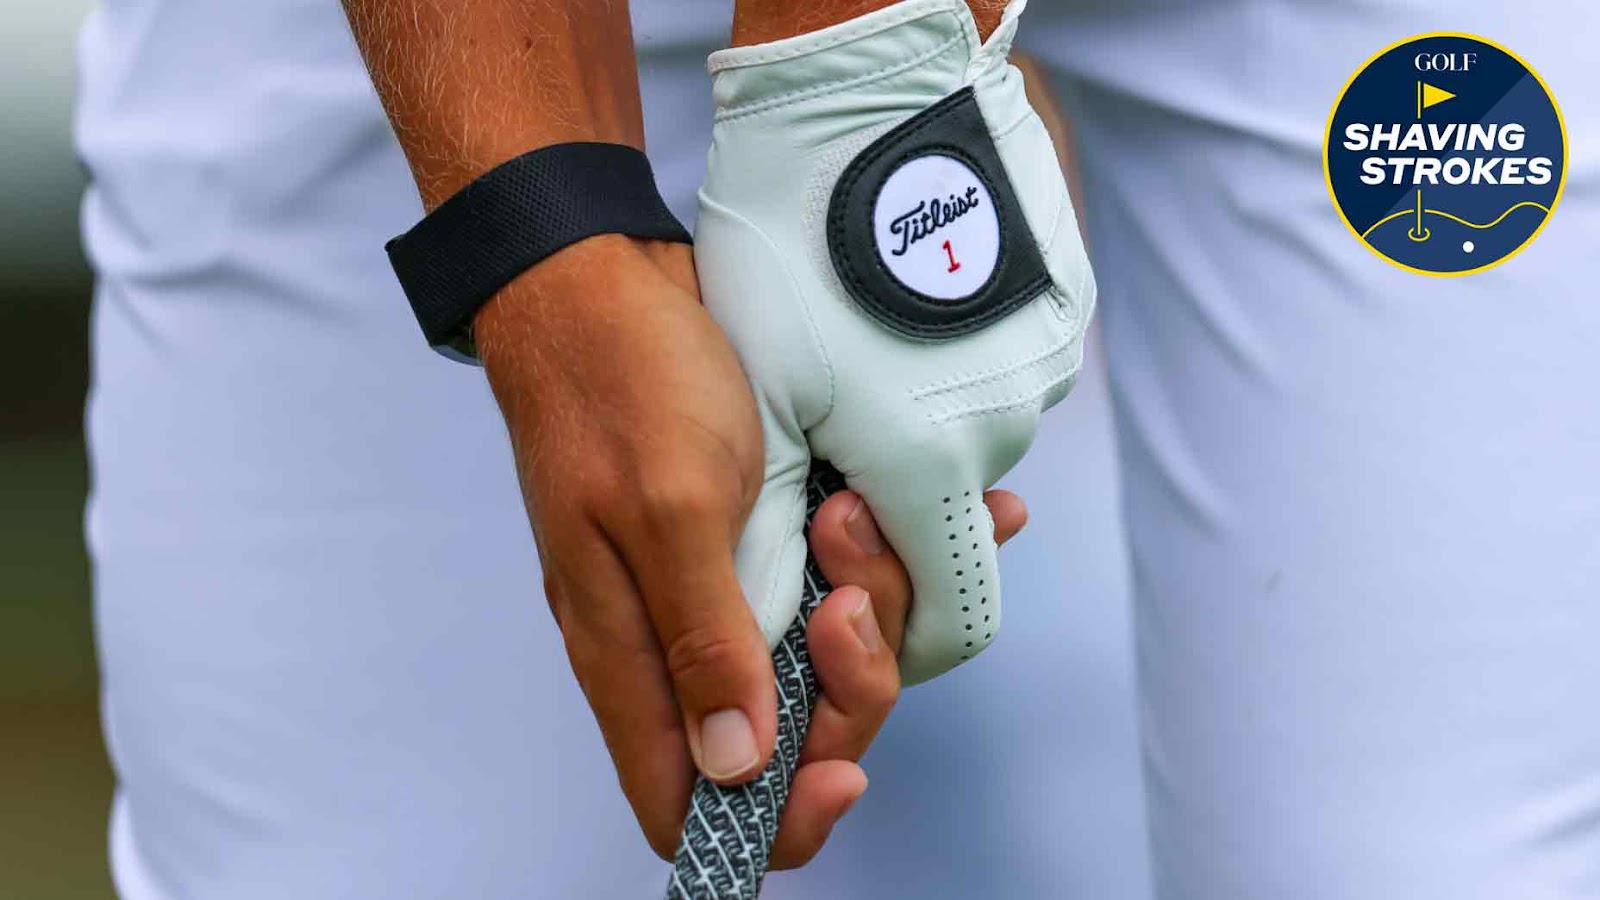 GOLF Top 100 Teacher Jonathan Yarwood says this common golf grip habit is causing mishits, and offers a tip to improve your ball contact